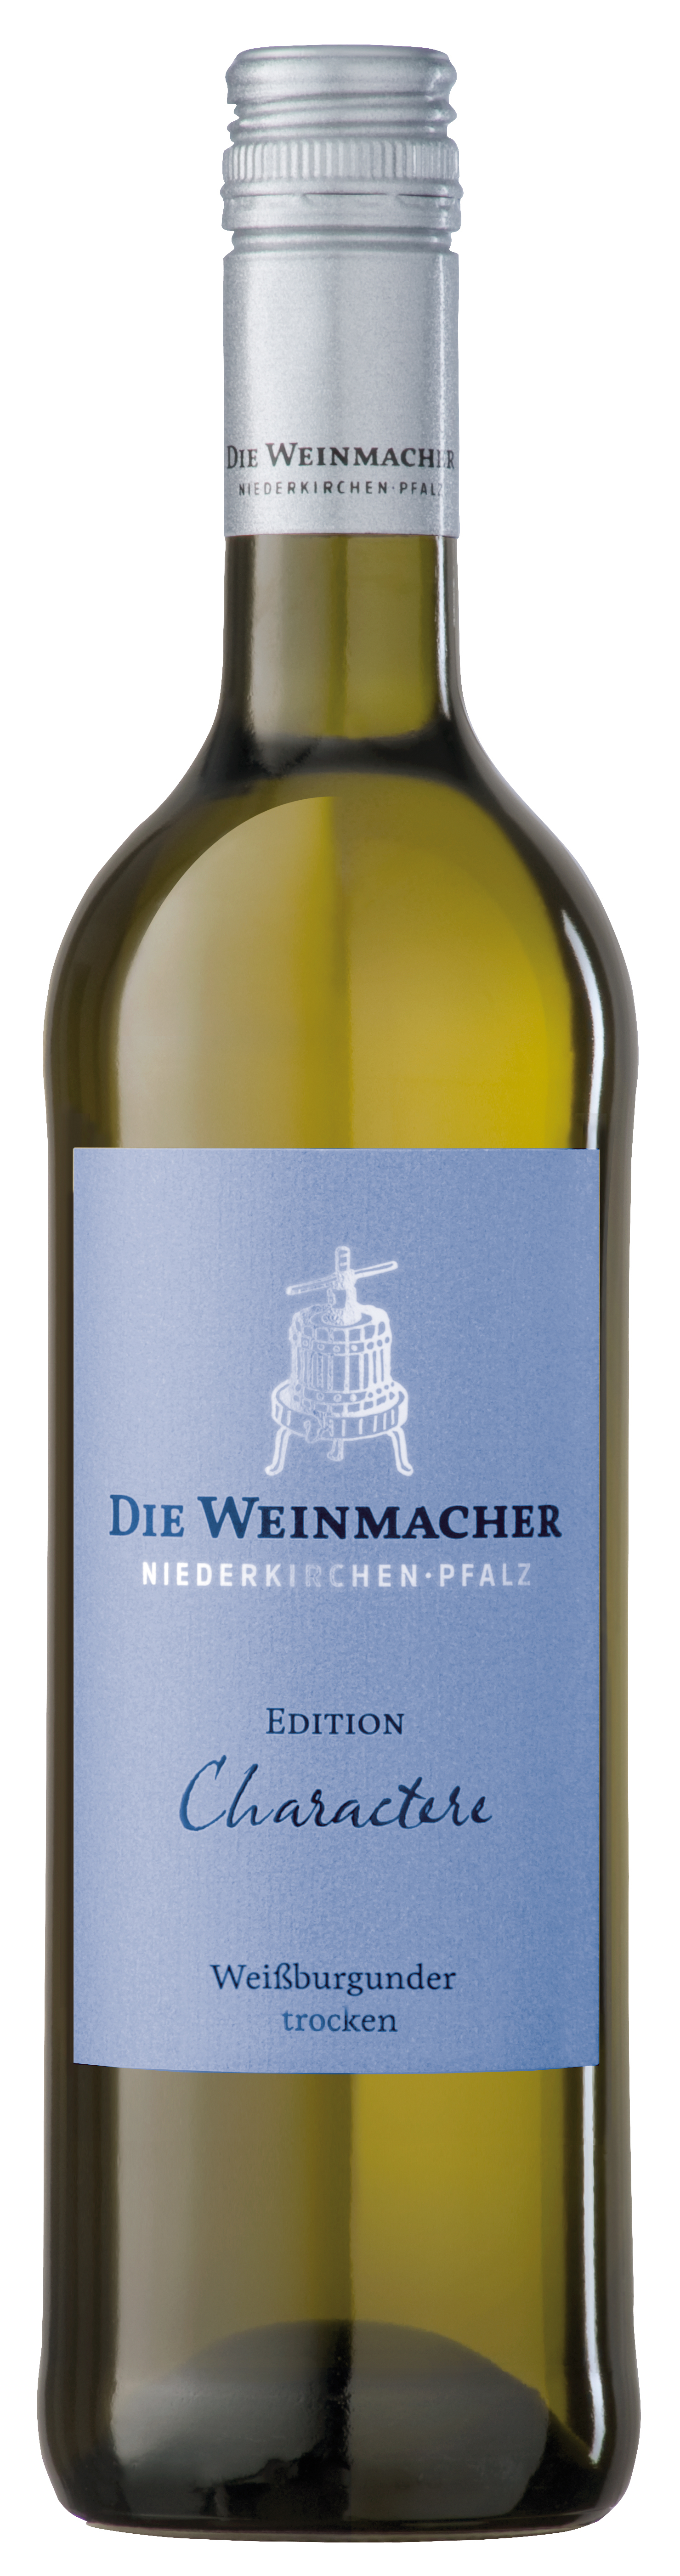 wein.plus Find+Buy: The wines members our of | wein.plus Find+Buy